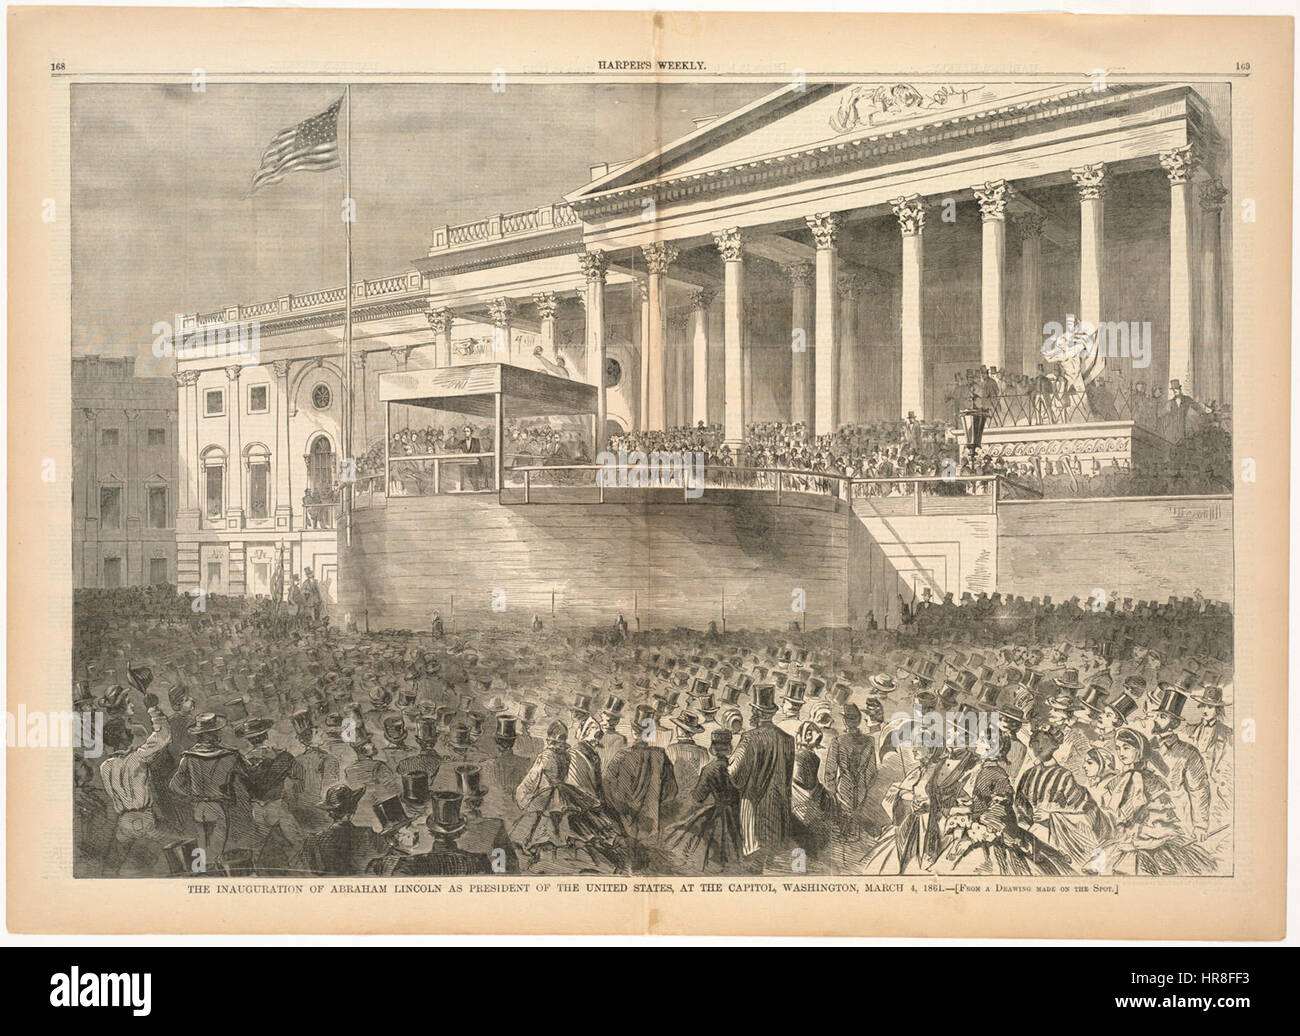 The Inauguration of Abraham Lincoln as President of the United States, at the Capitol, Washington, March 4, 1861 (Boston Public Library) Stock Photo